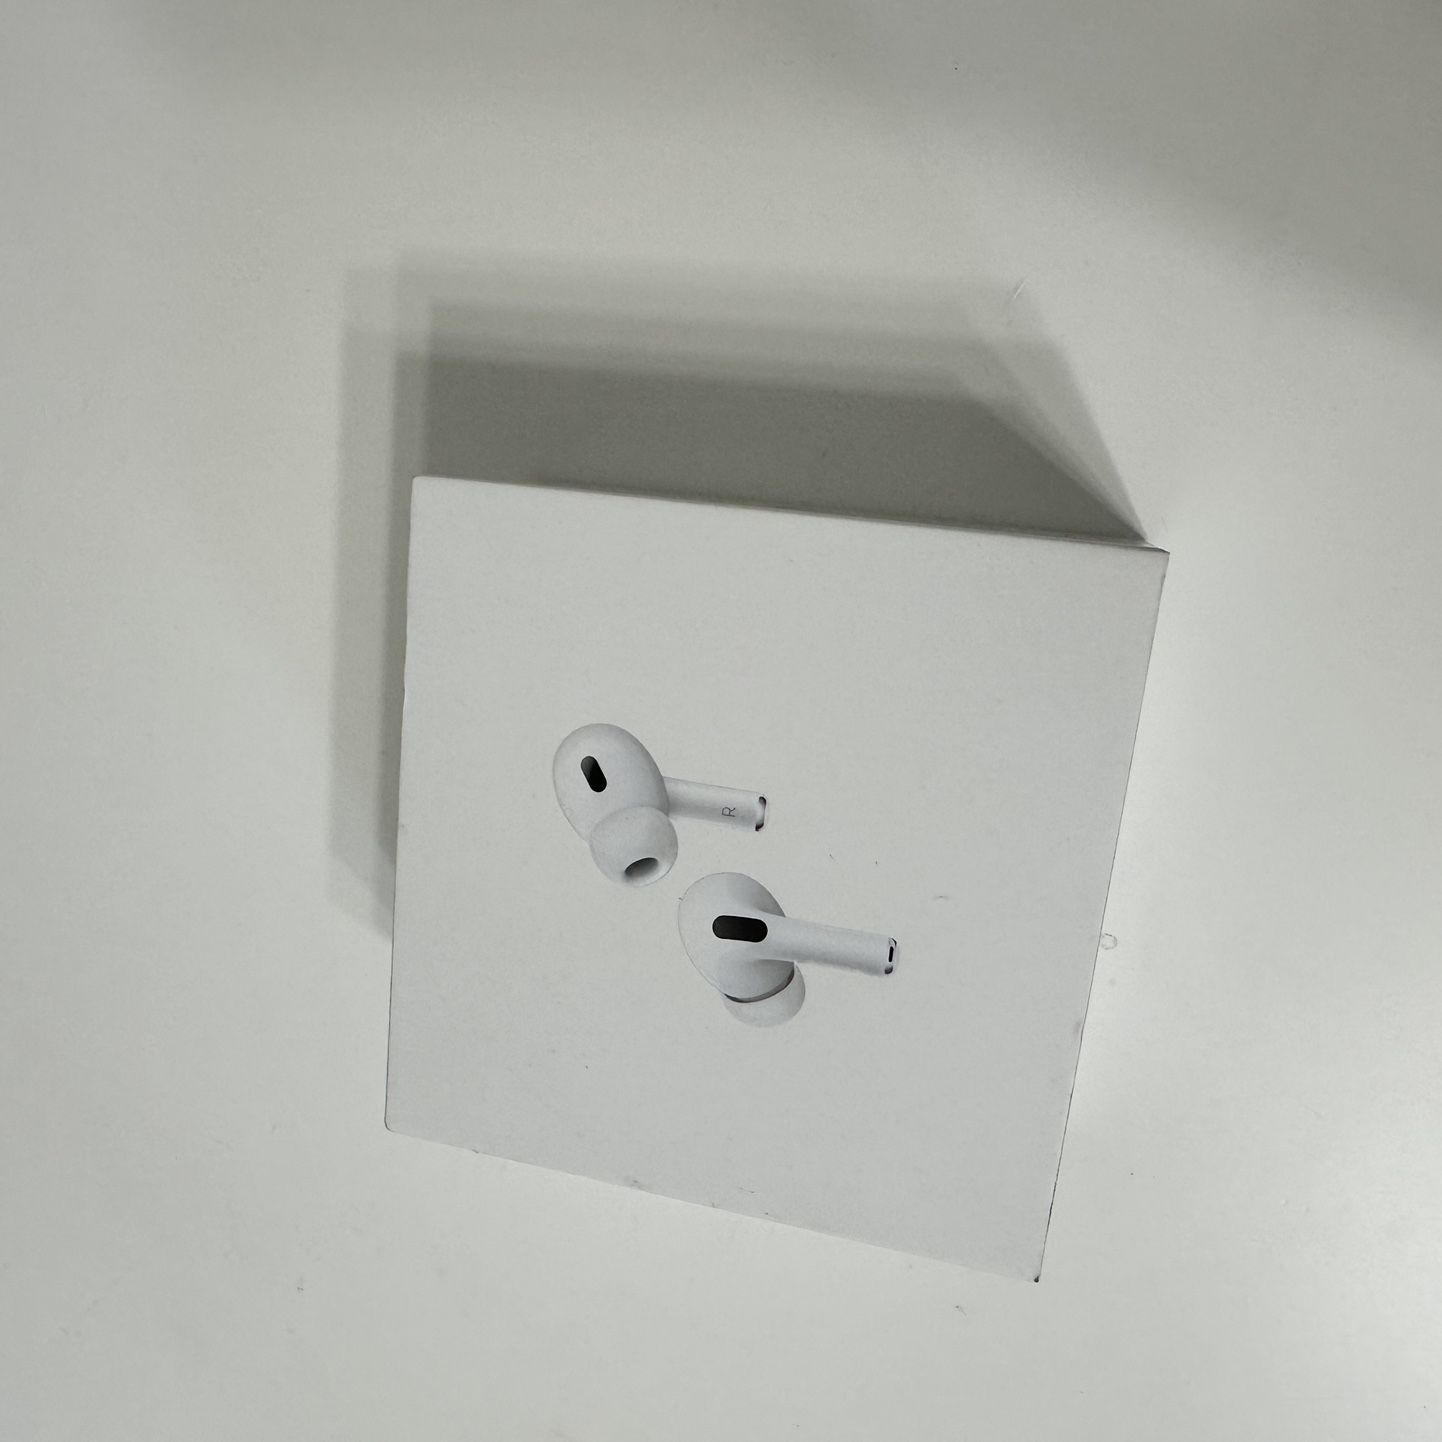 Apple AirPods Pro (2nd generation) NEW - un-opened box